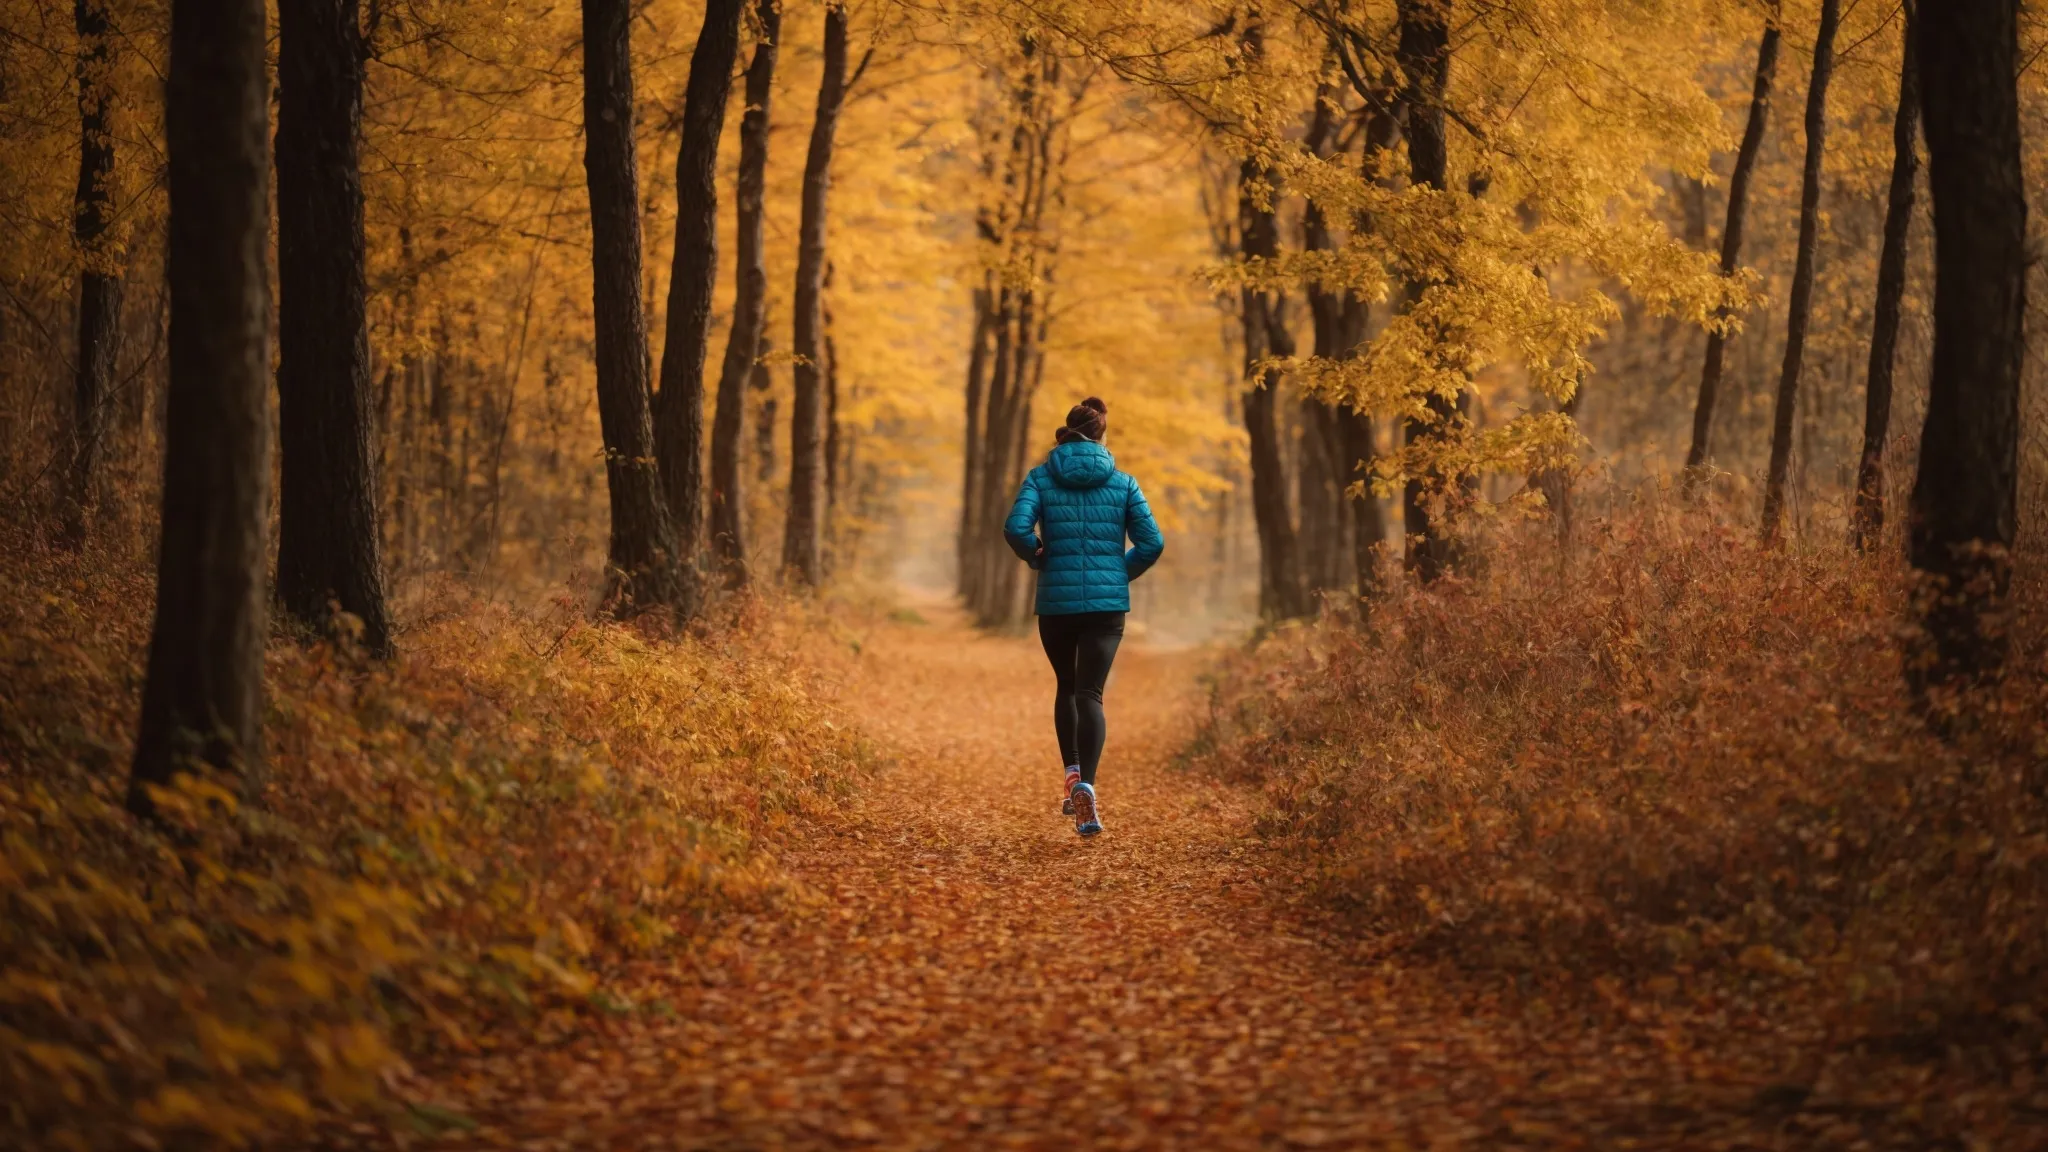 a person jogs through a forest with autumn-colored trees, reflecting a commitment to health and exercise amidst the changing seasons.